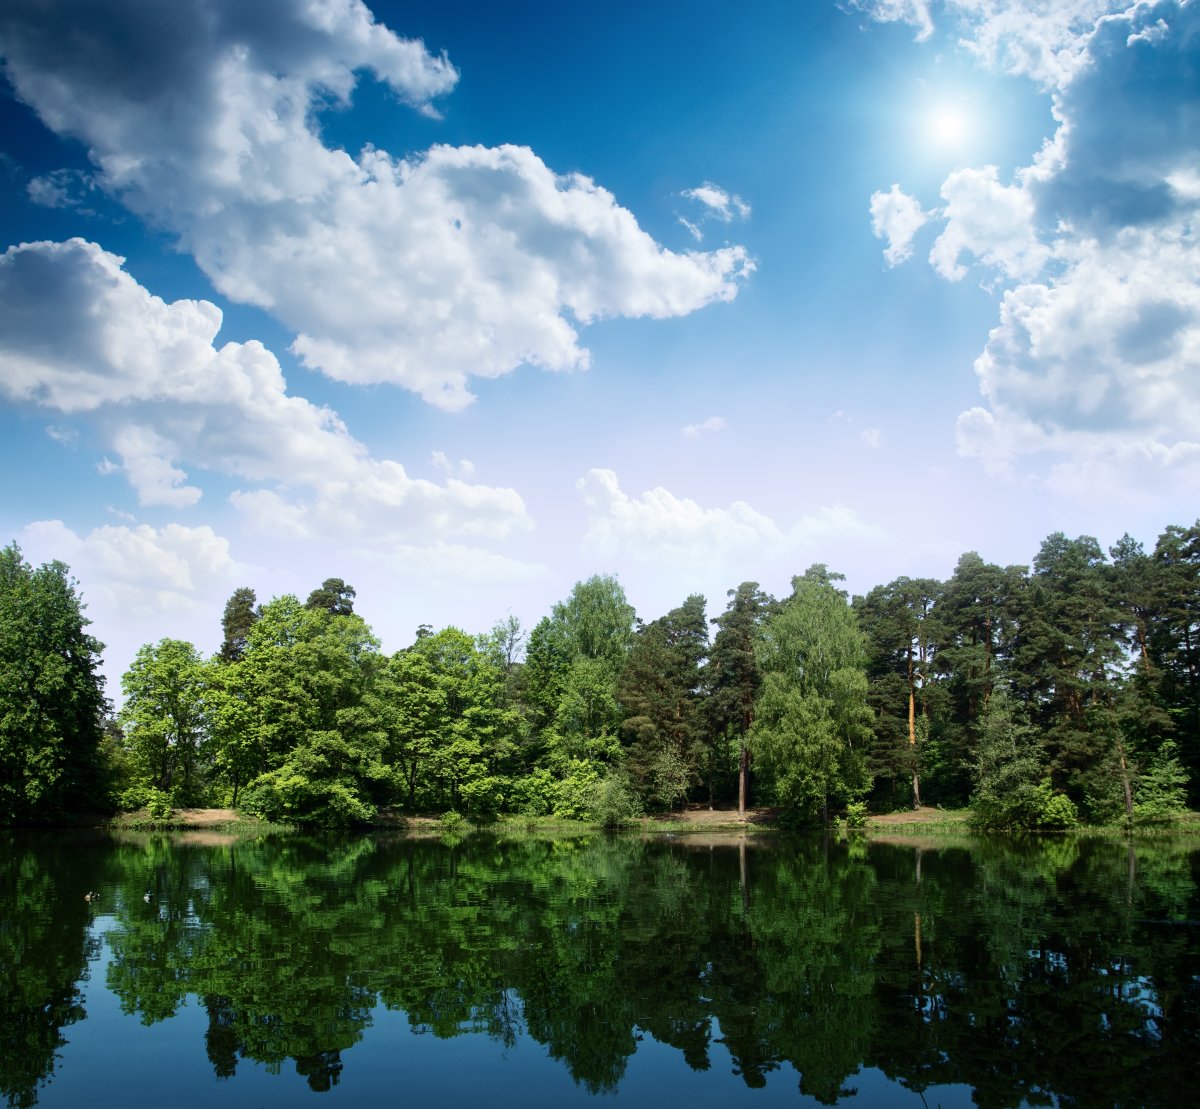 Blue sky, white clouds, green trees, river pictures